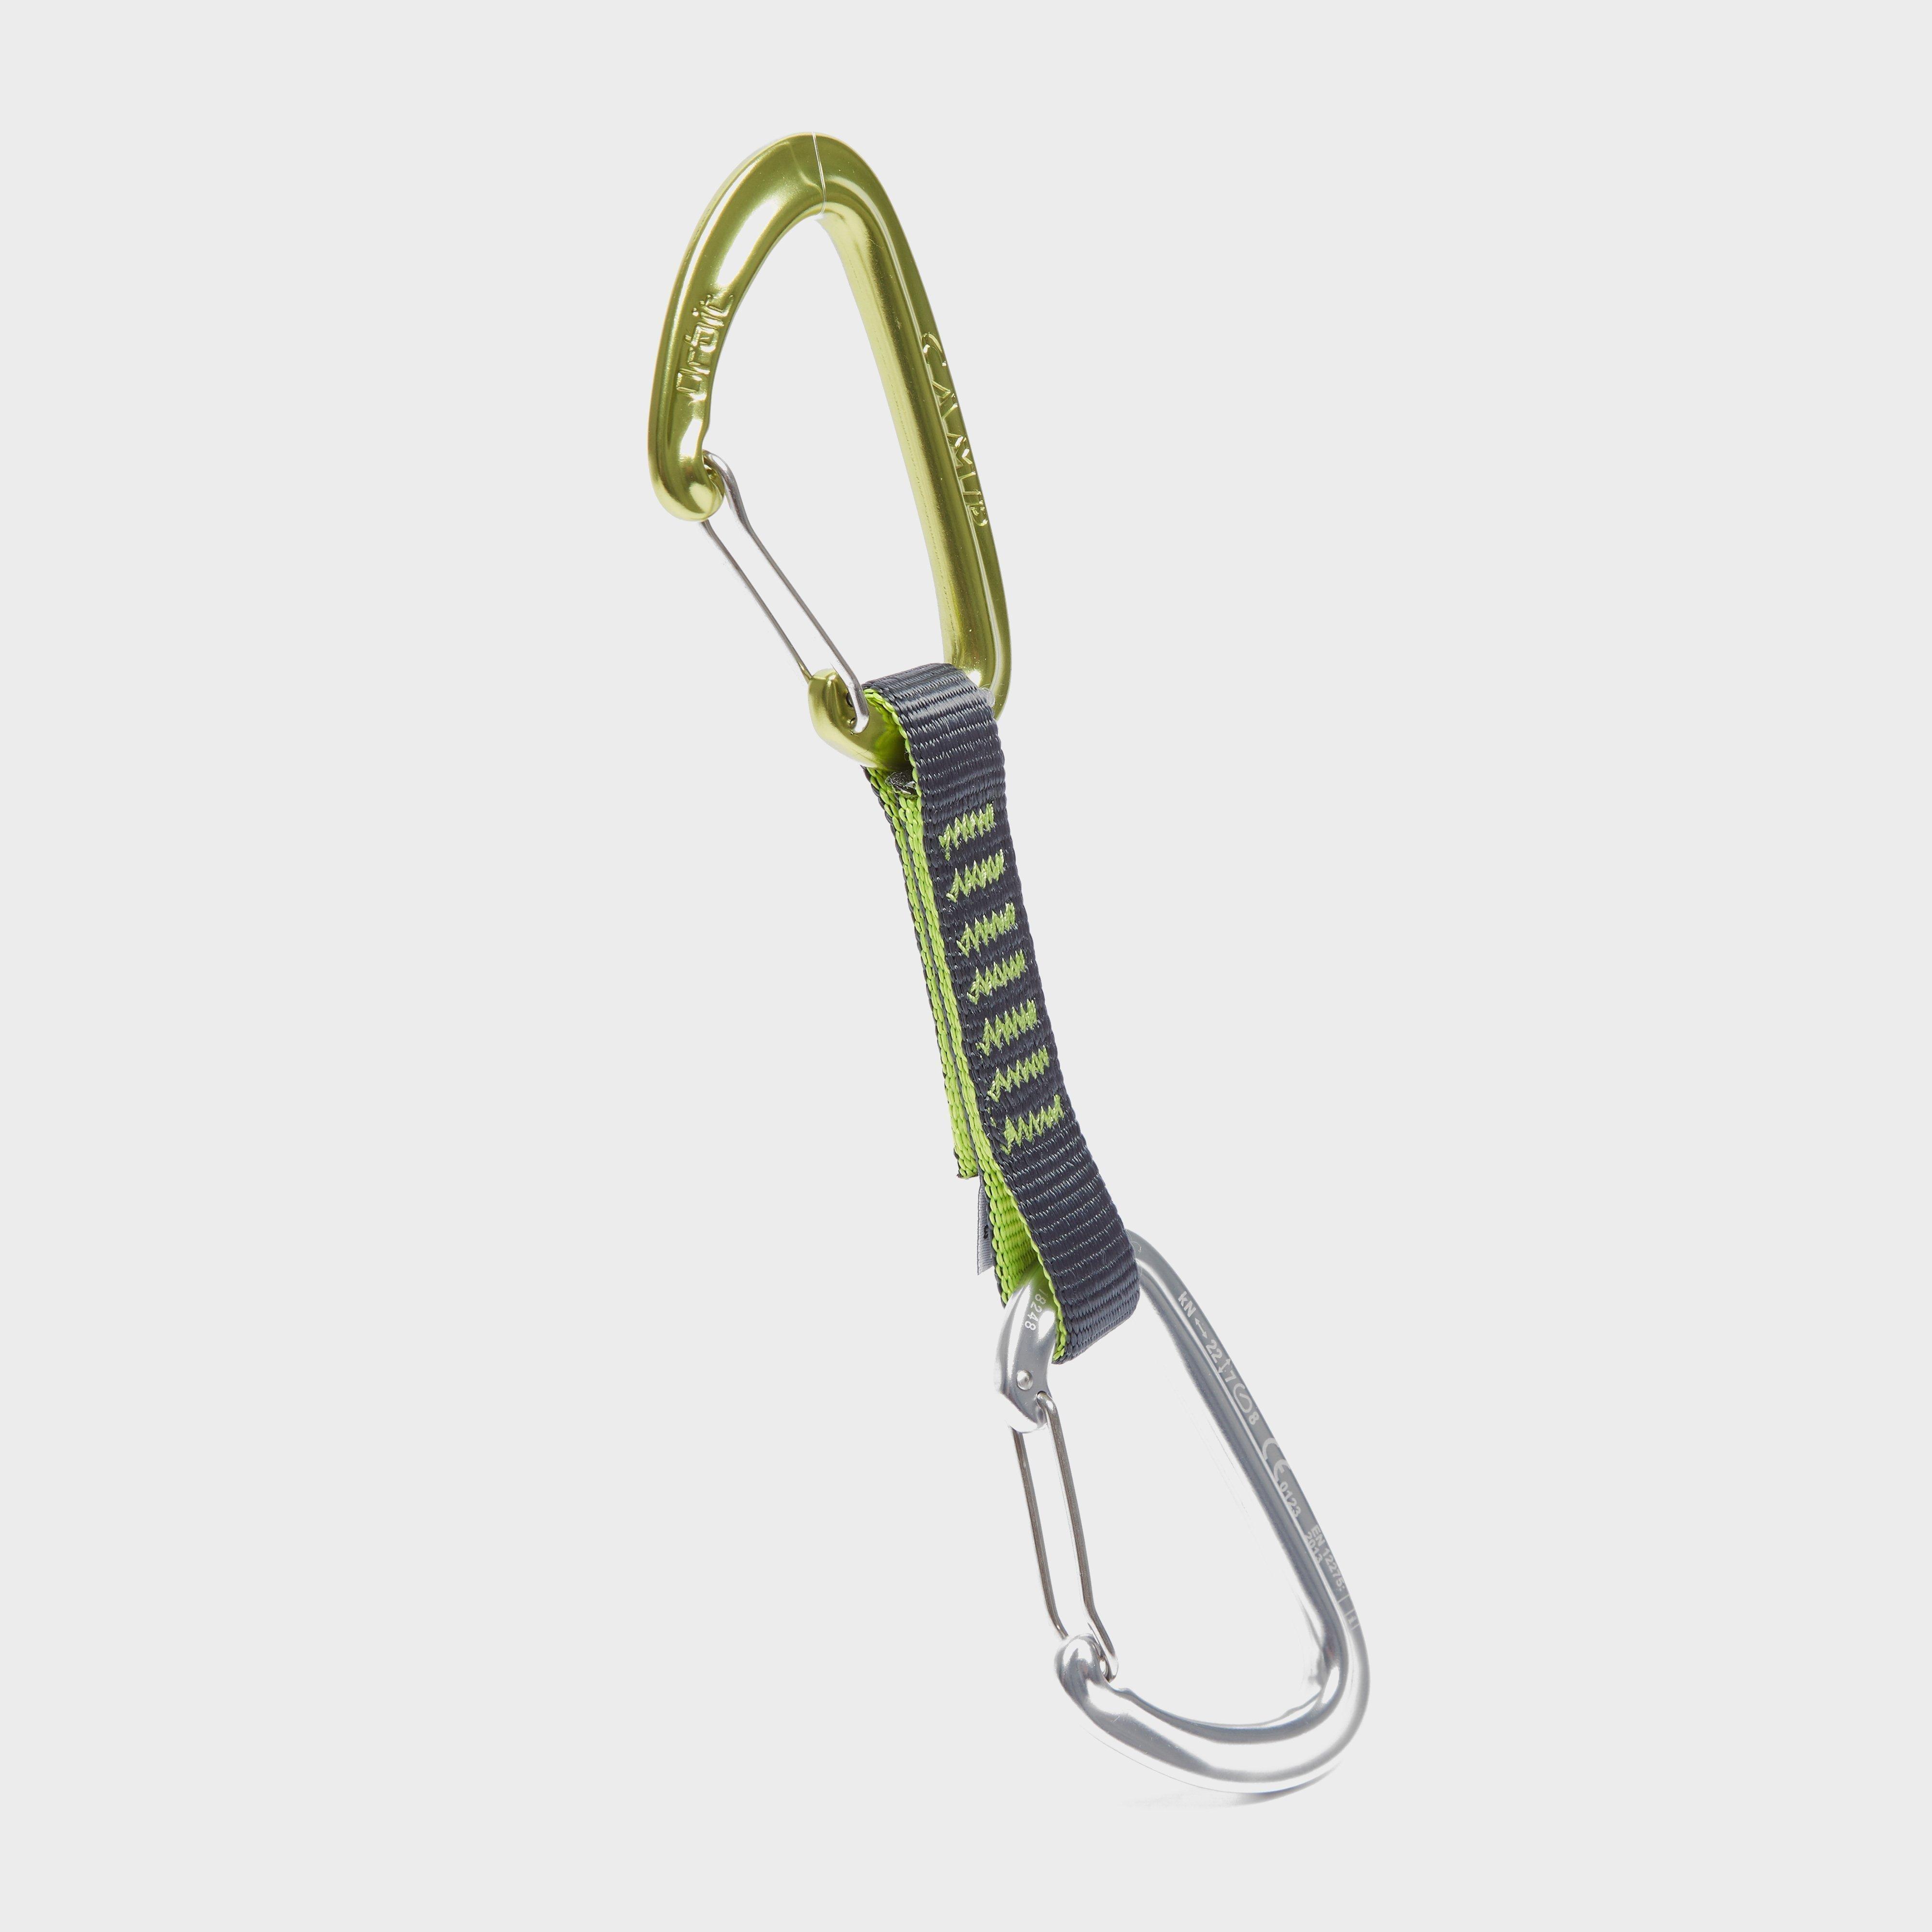 Camp Orbit Express Wire Quickdraw Carabiners - Green/11cm  Green/11cm